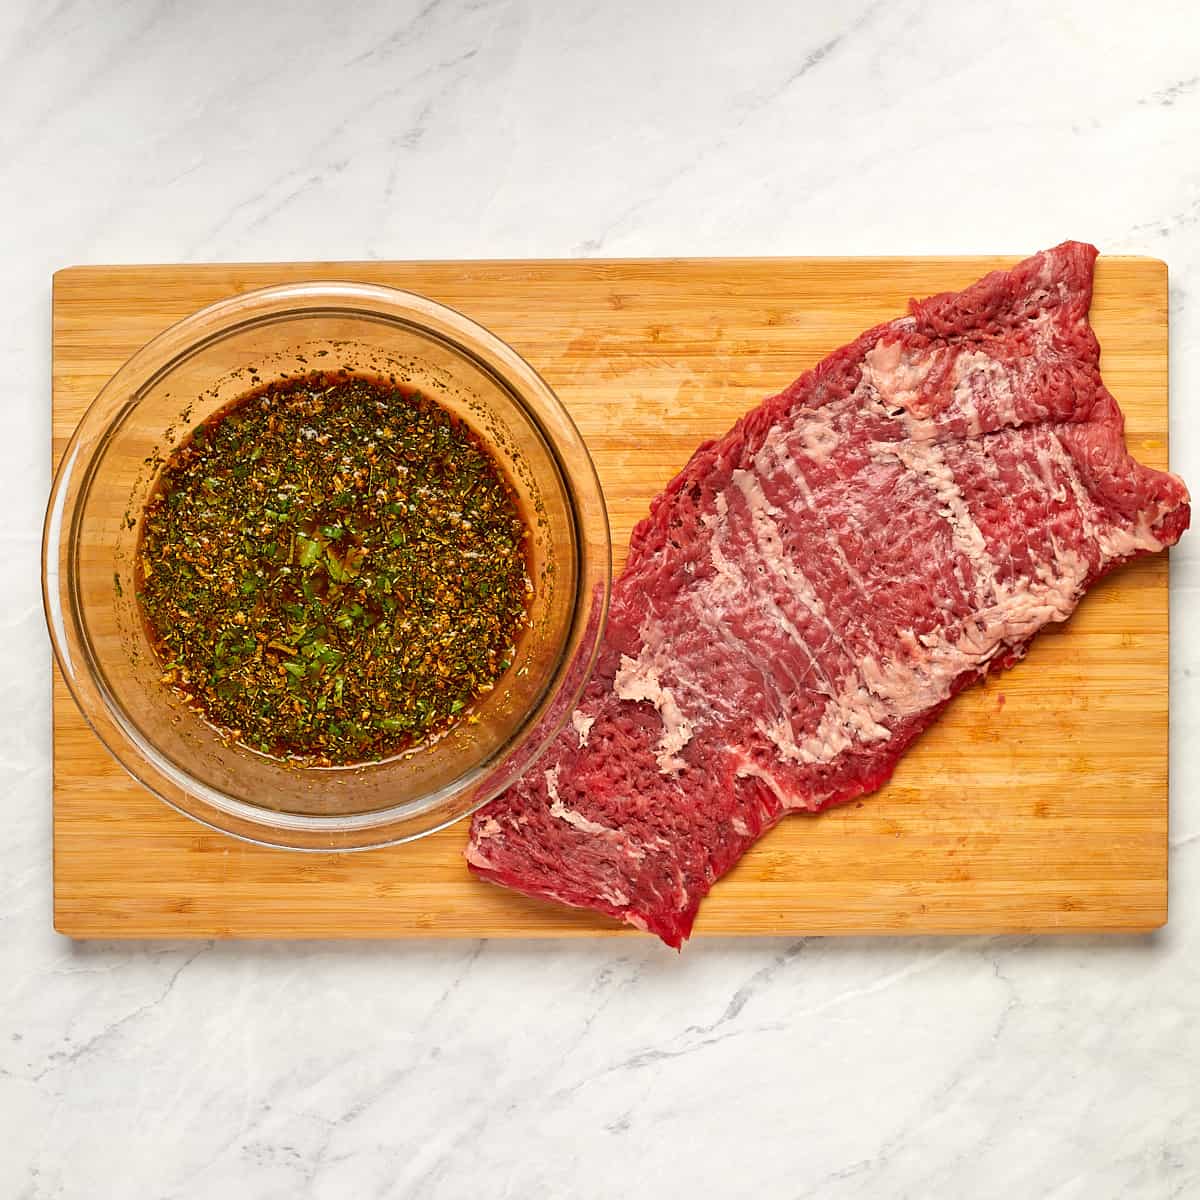 tenderized skirt steak on a cutting board and a bowl of the prepared marinade